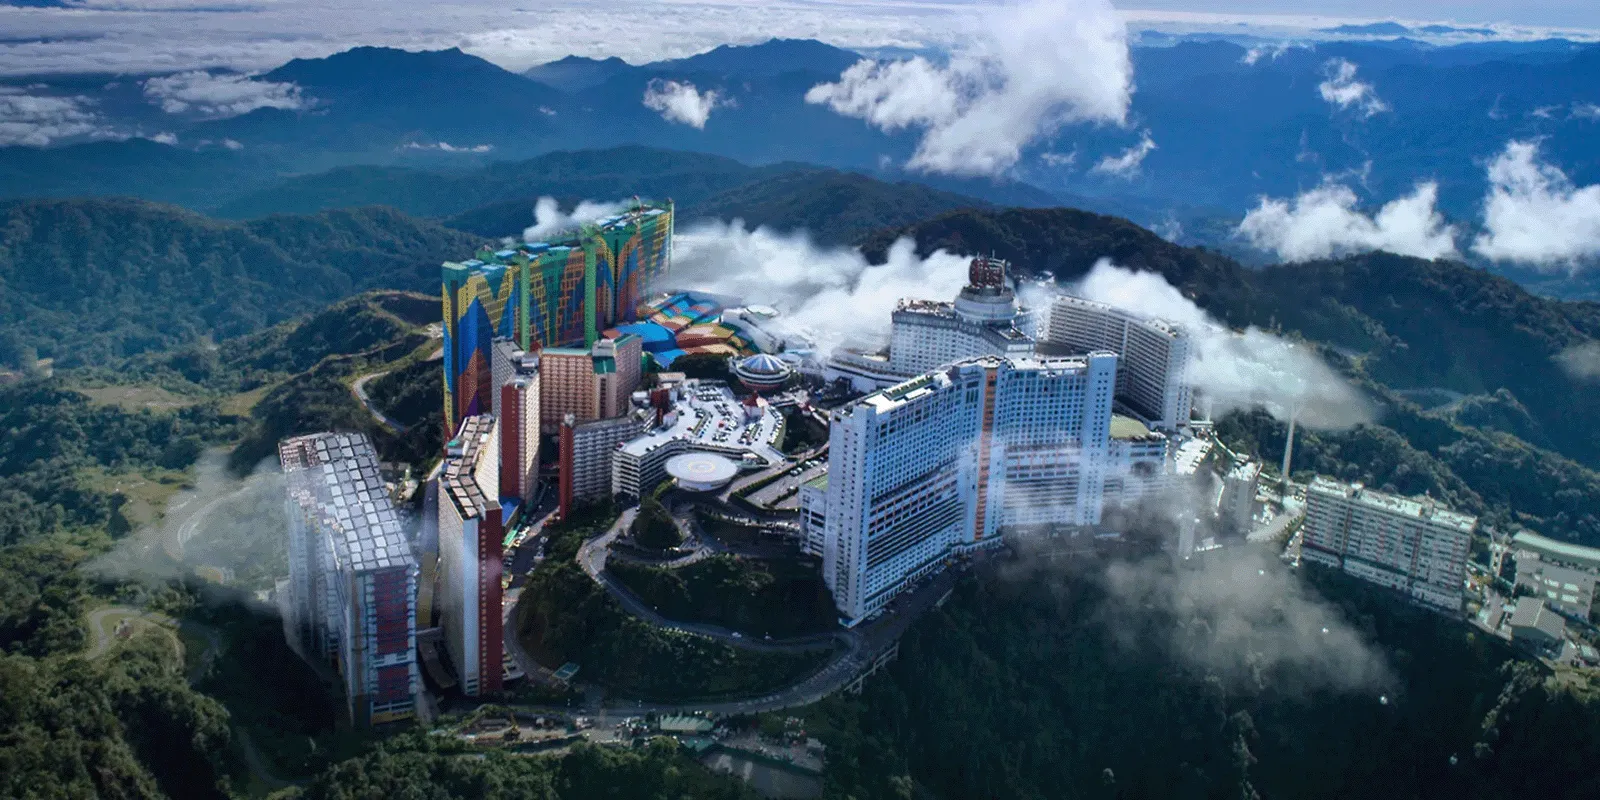 Best Hotels In Genting Highlands And Amazing Things To Do There